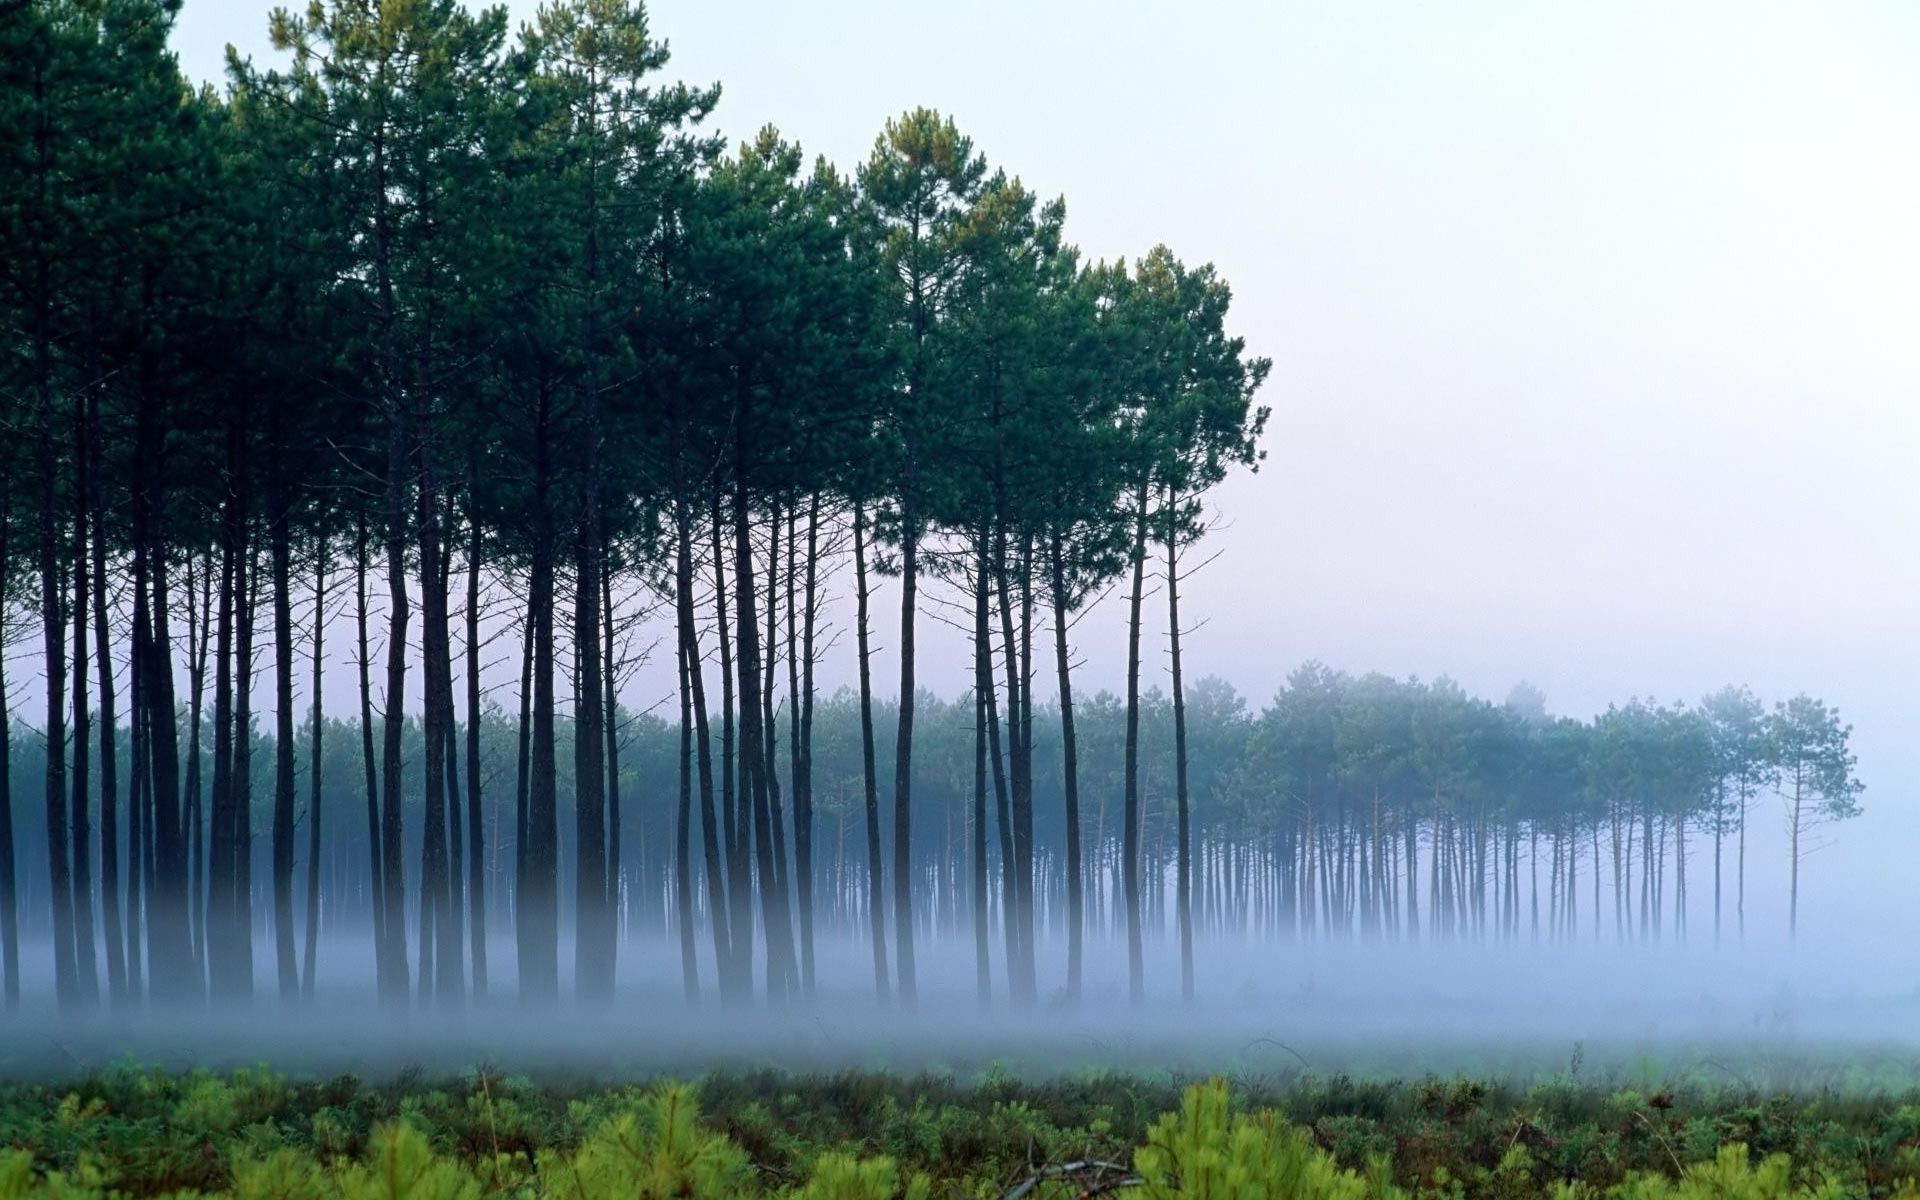 trees tree nature landscape water wood outdoors environment summer lake reflection sky fog dawn grass